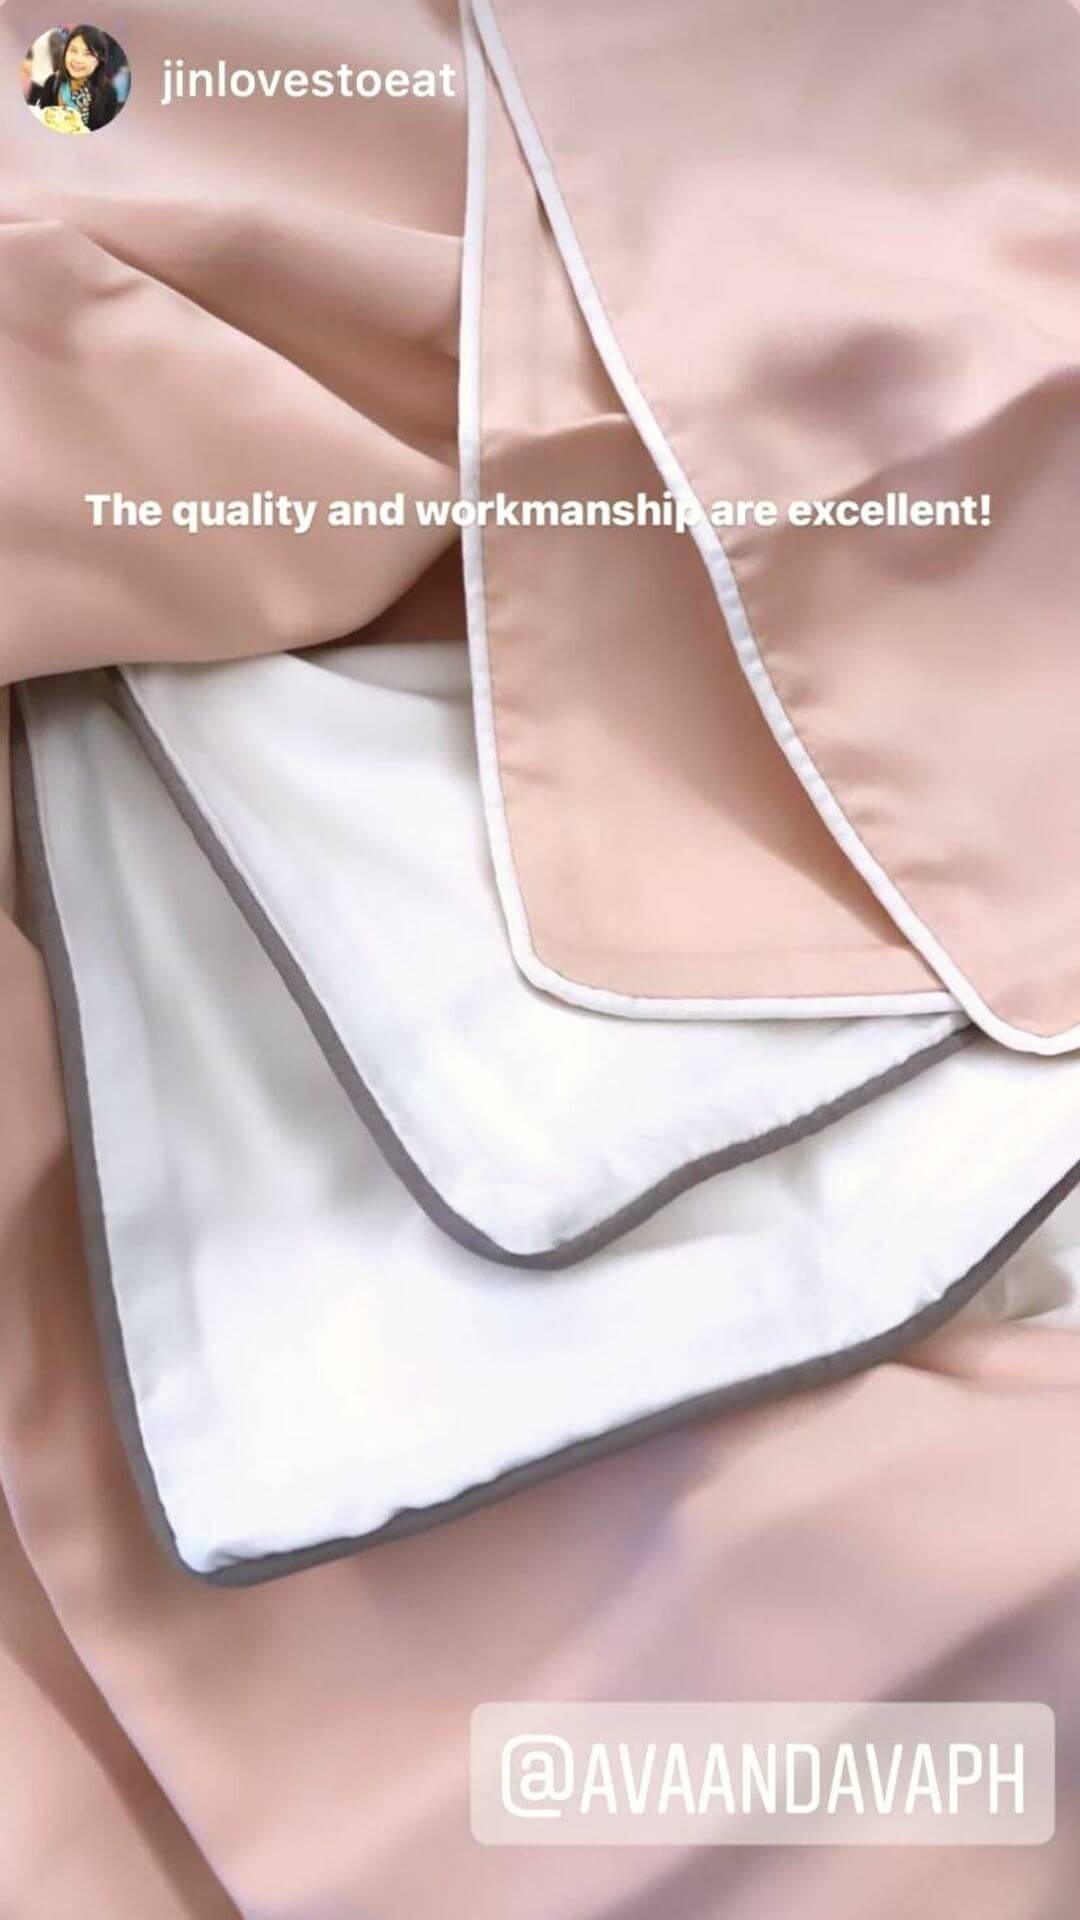 ava and ava ph review - cool, buttery smooth and silky soft organic bamboo lyocell sheet set, pillowcases, duvet cover in blush pink and white with white piping by jin loves to eat @jinlovestoeat